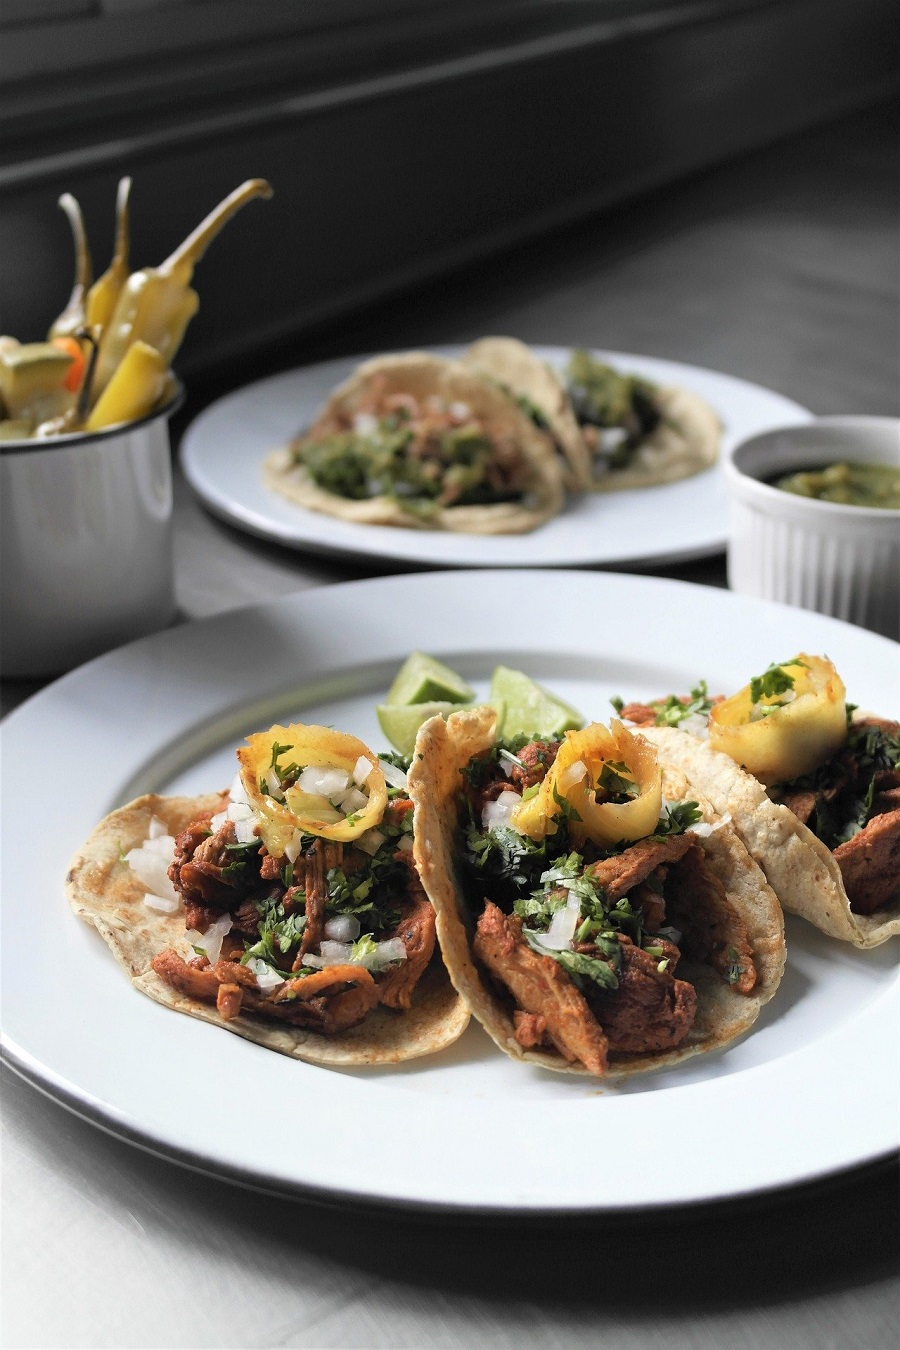 Slow Cooker Chicken Taco Recipes a Plate of Tacos on a Table